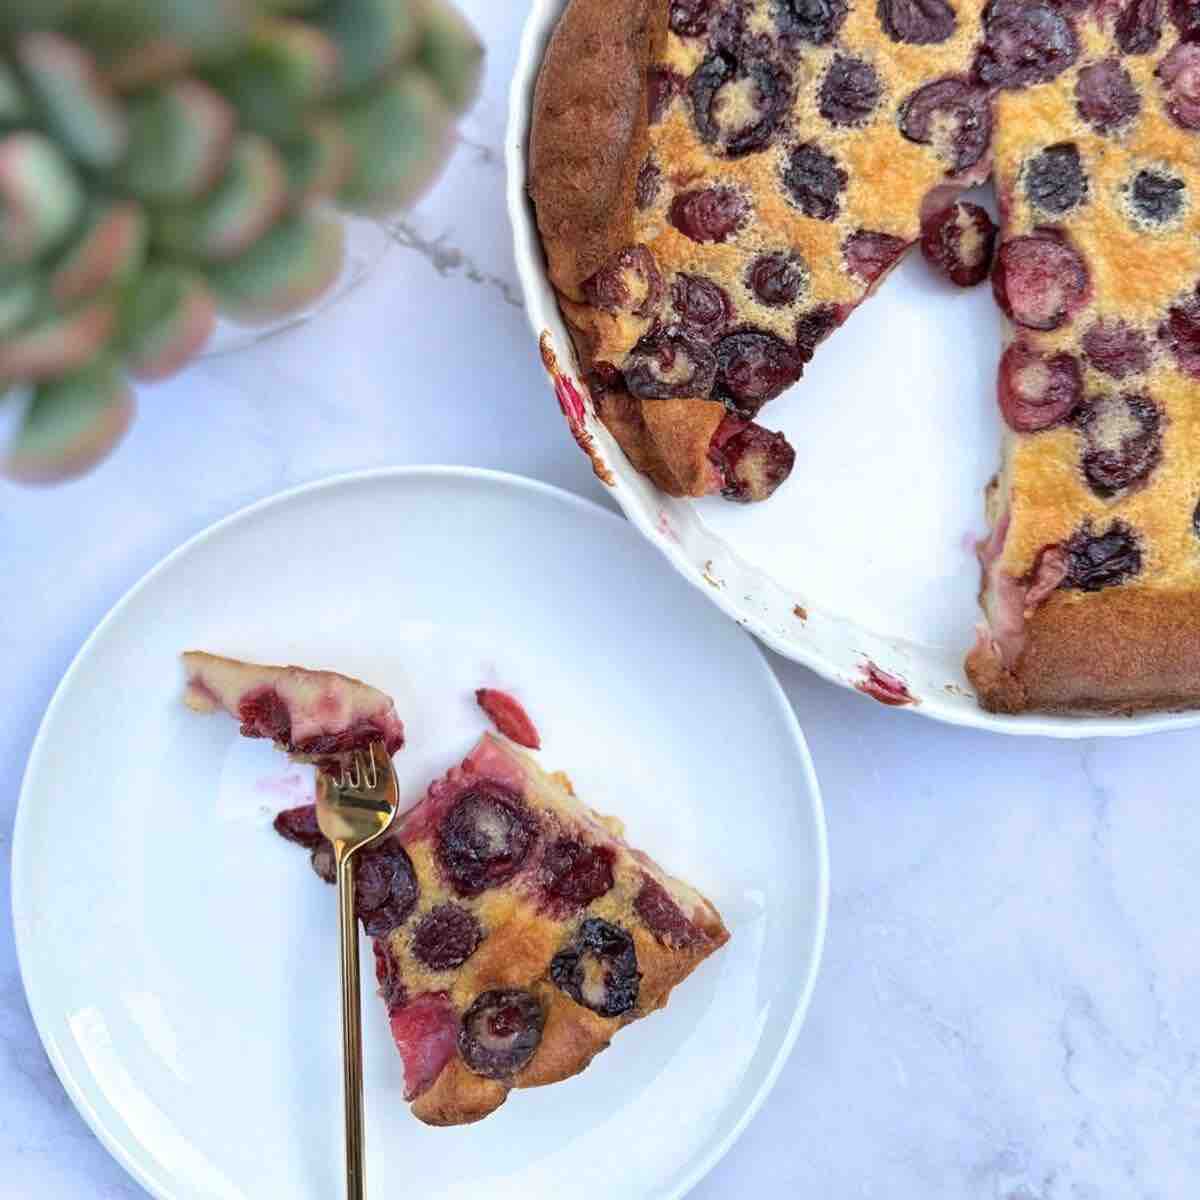 Cherry Clafoutis: A slice on a plate and the rest on the baking ceramic pan